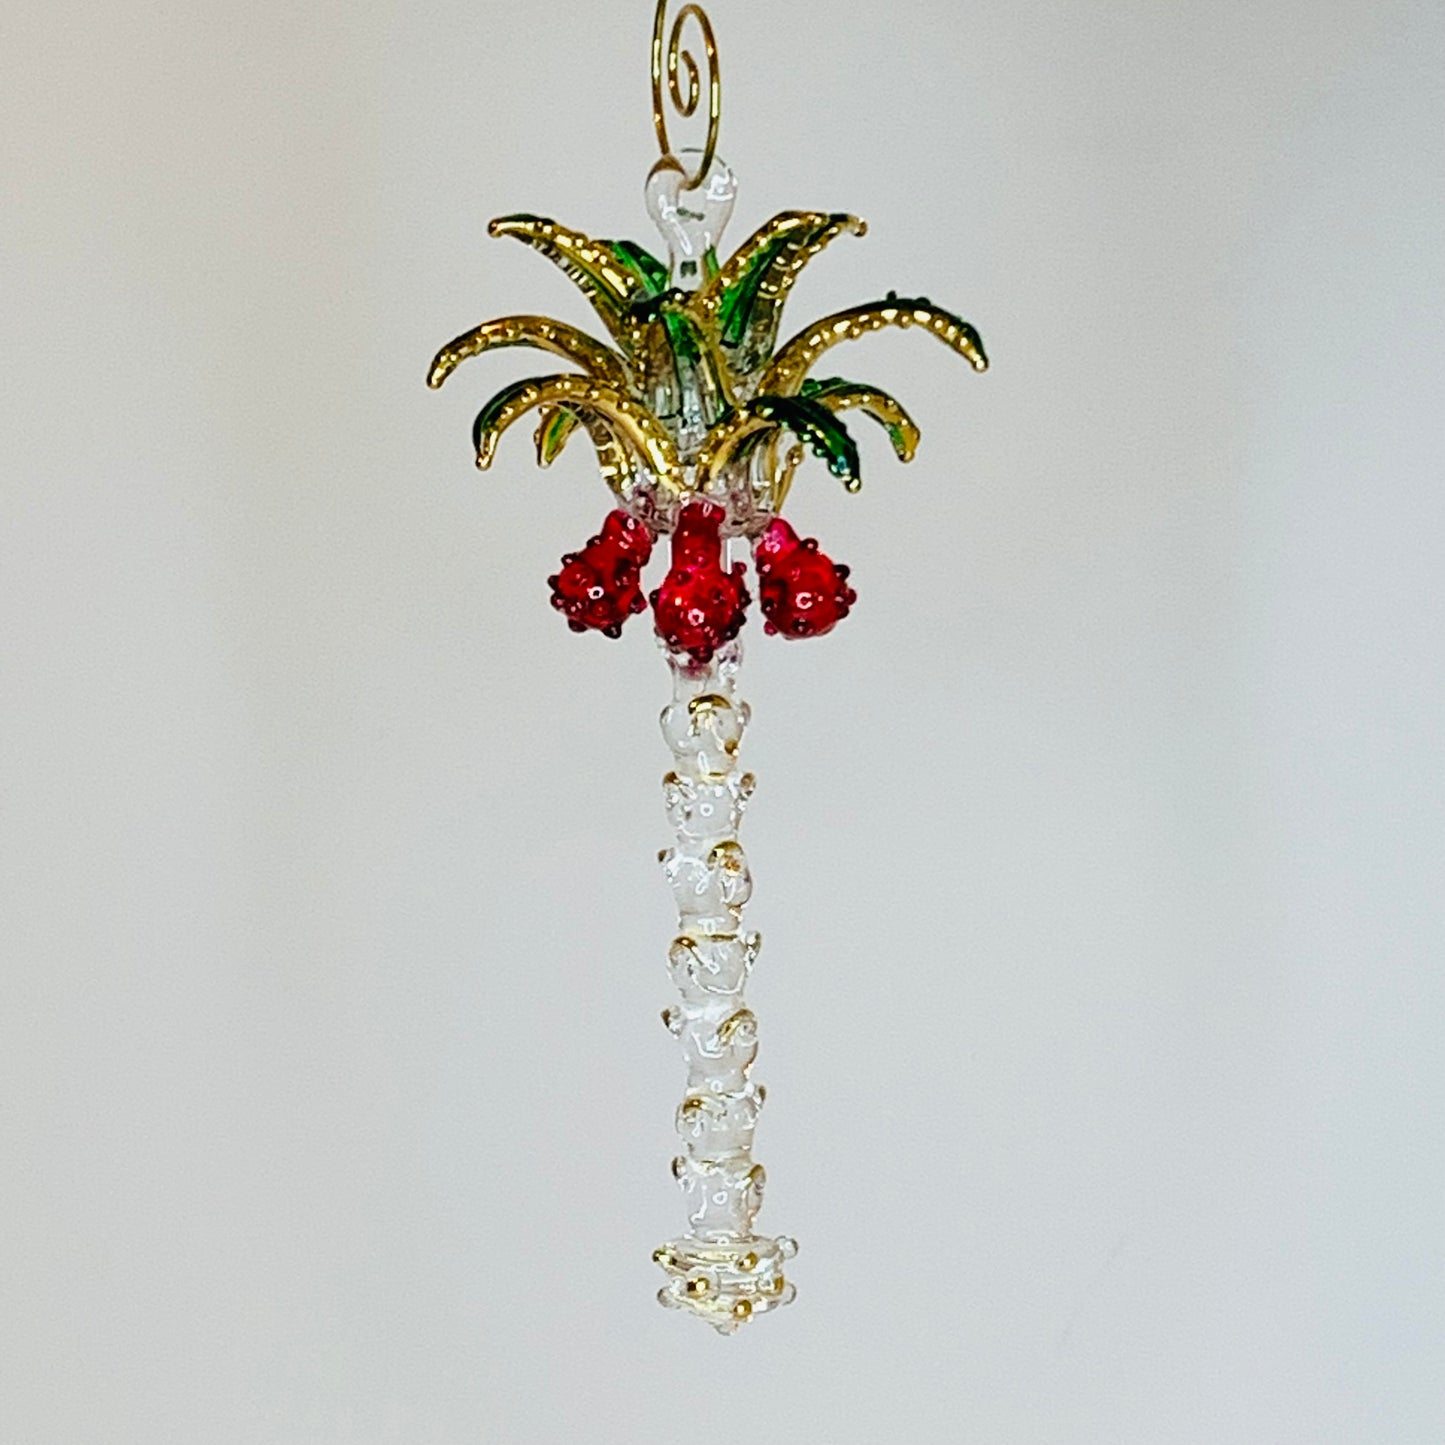 Handcrafted Glass Ornament - Palm Tree